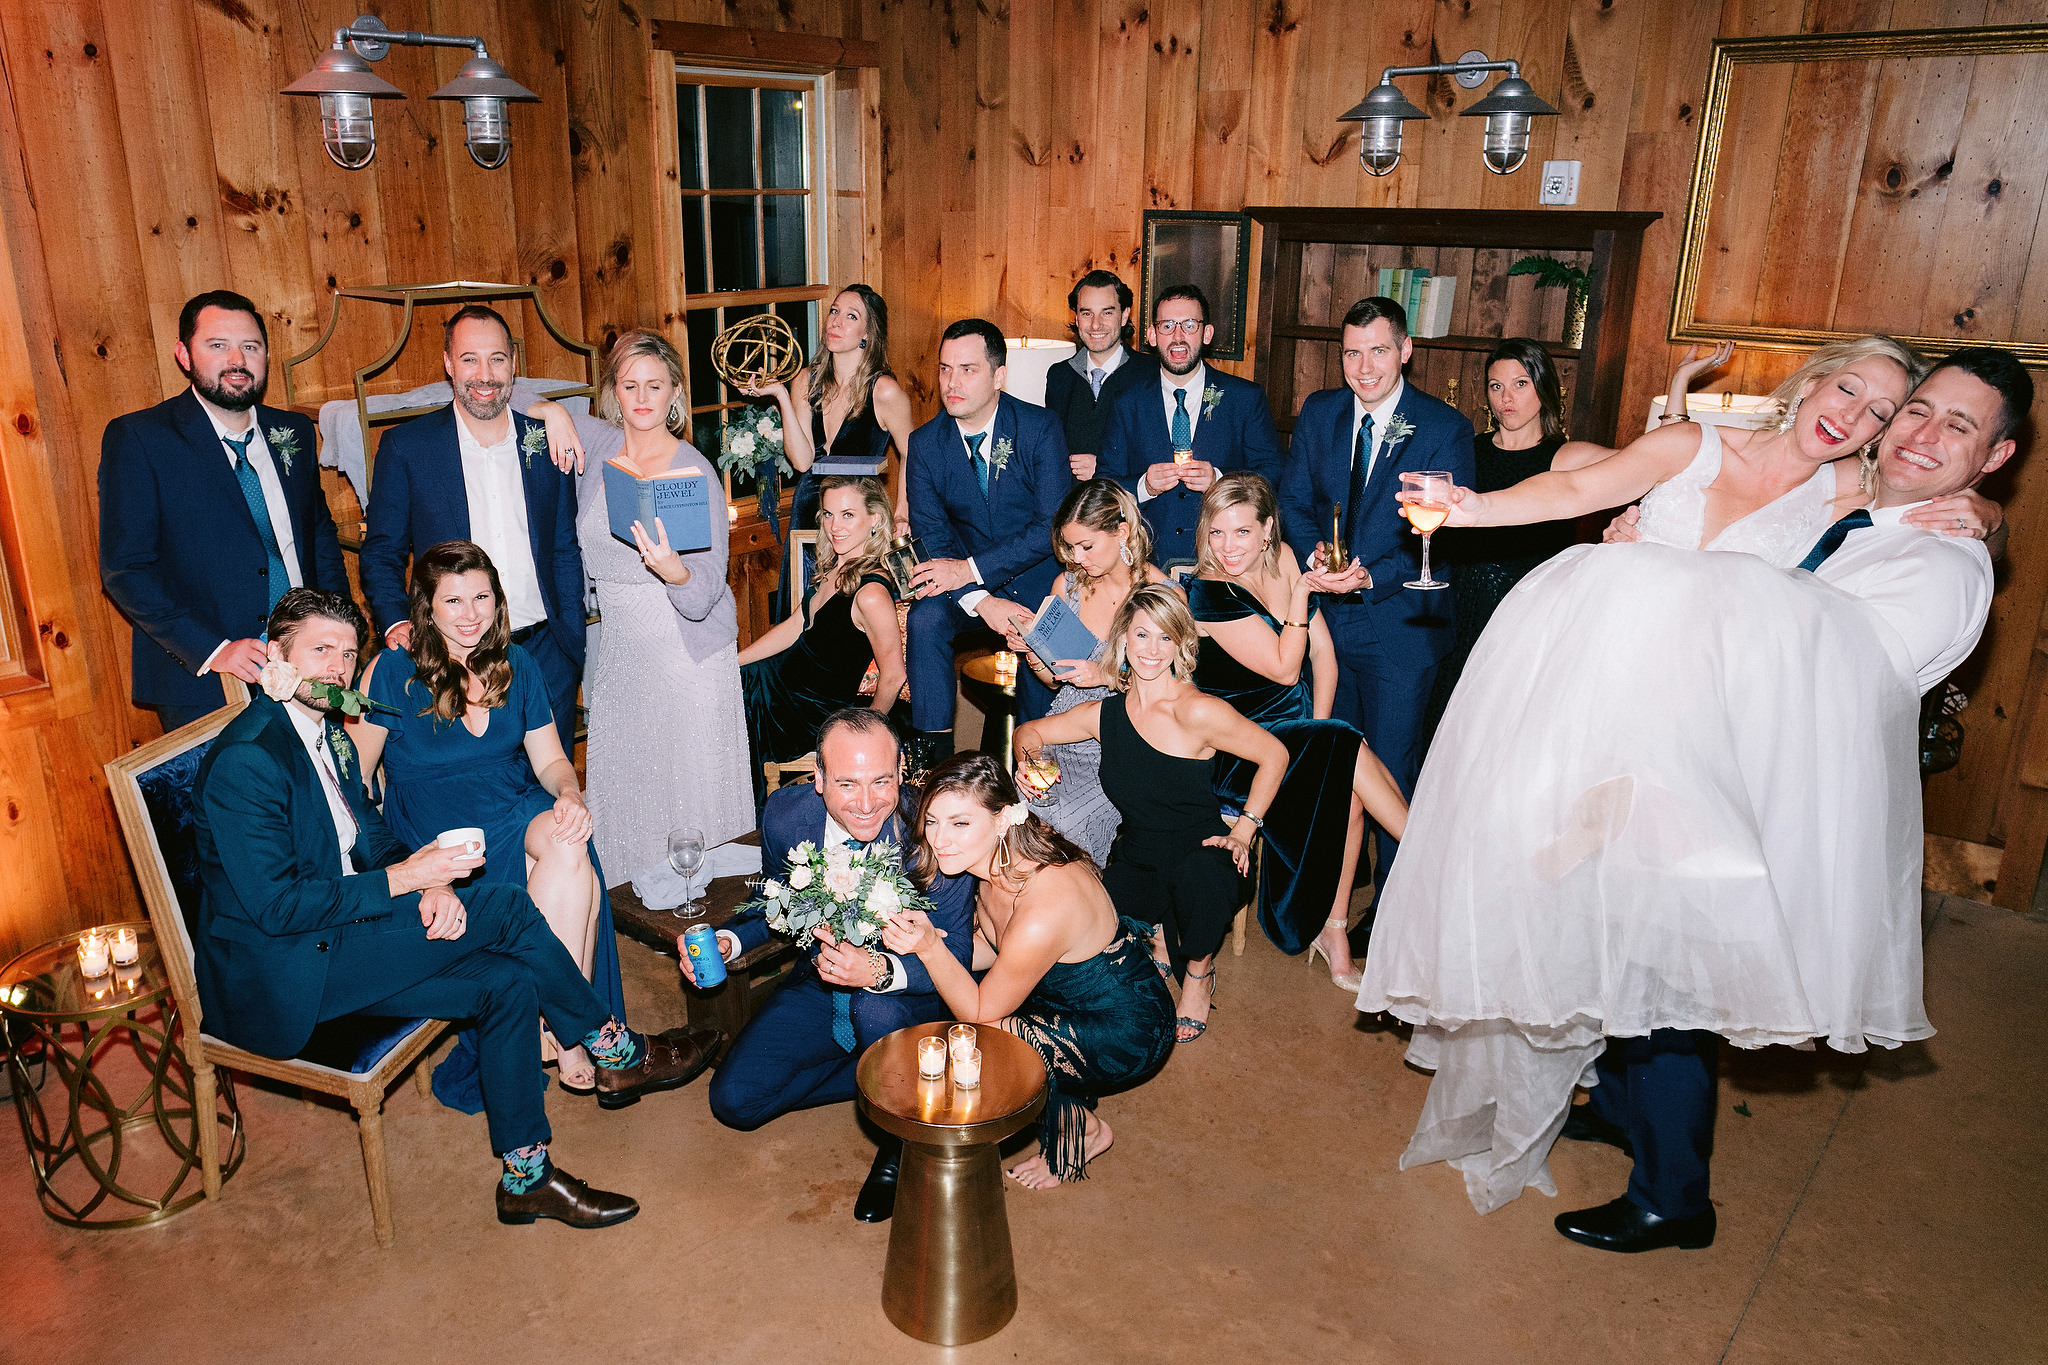 The bride, groom, and wedding party are having a good time at the wedding reception. Editorial destination wedding image by Jenny Fu Studio.